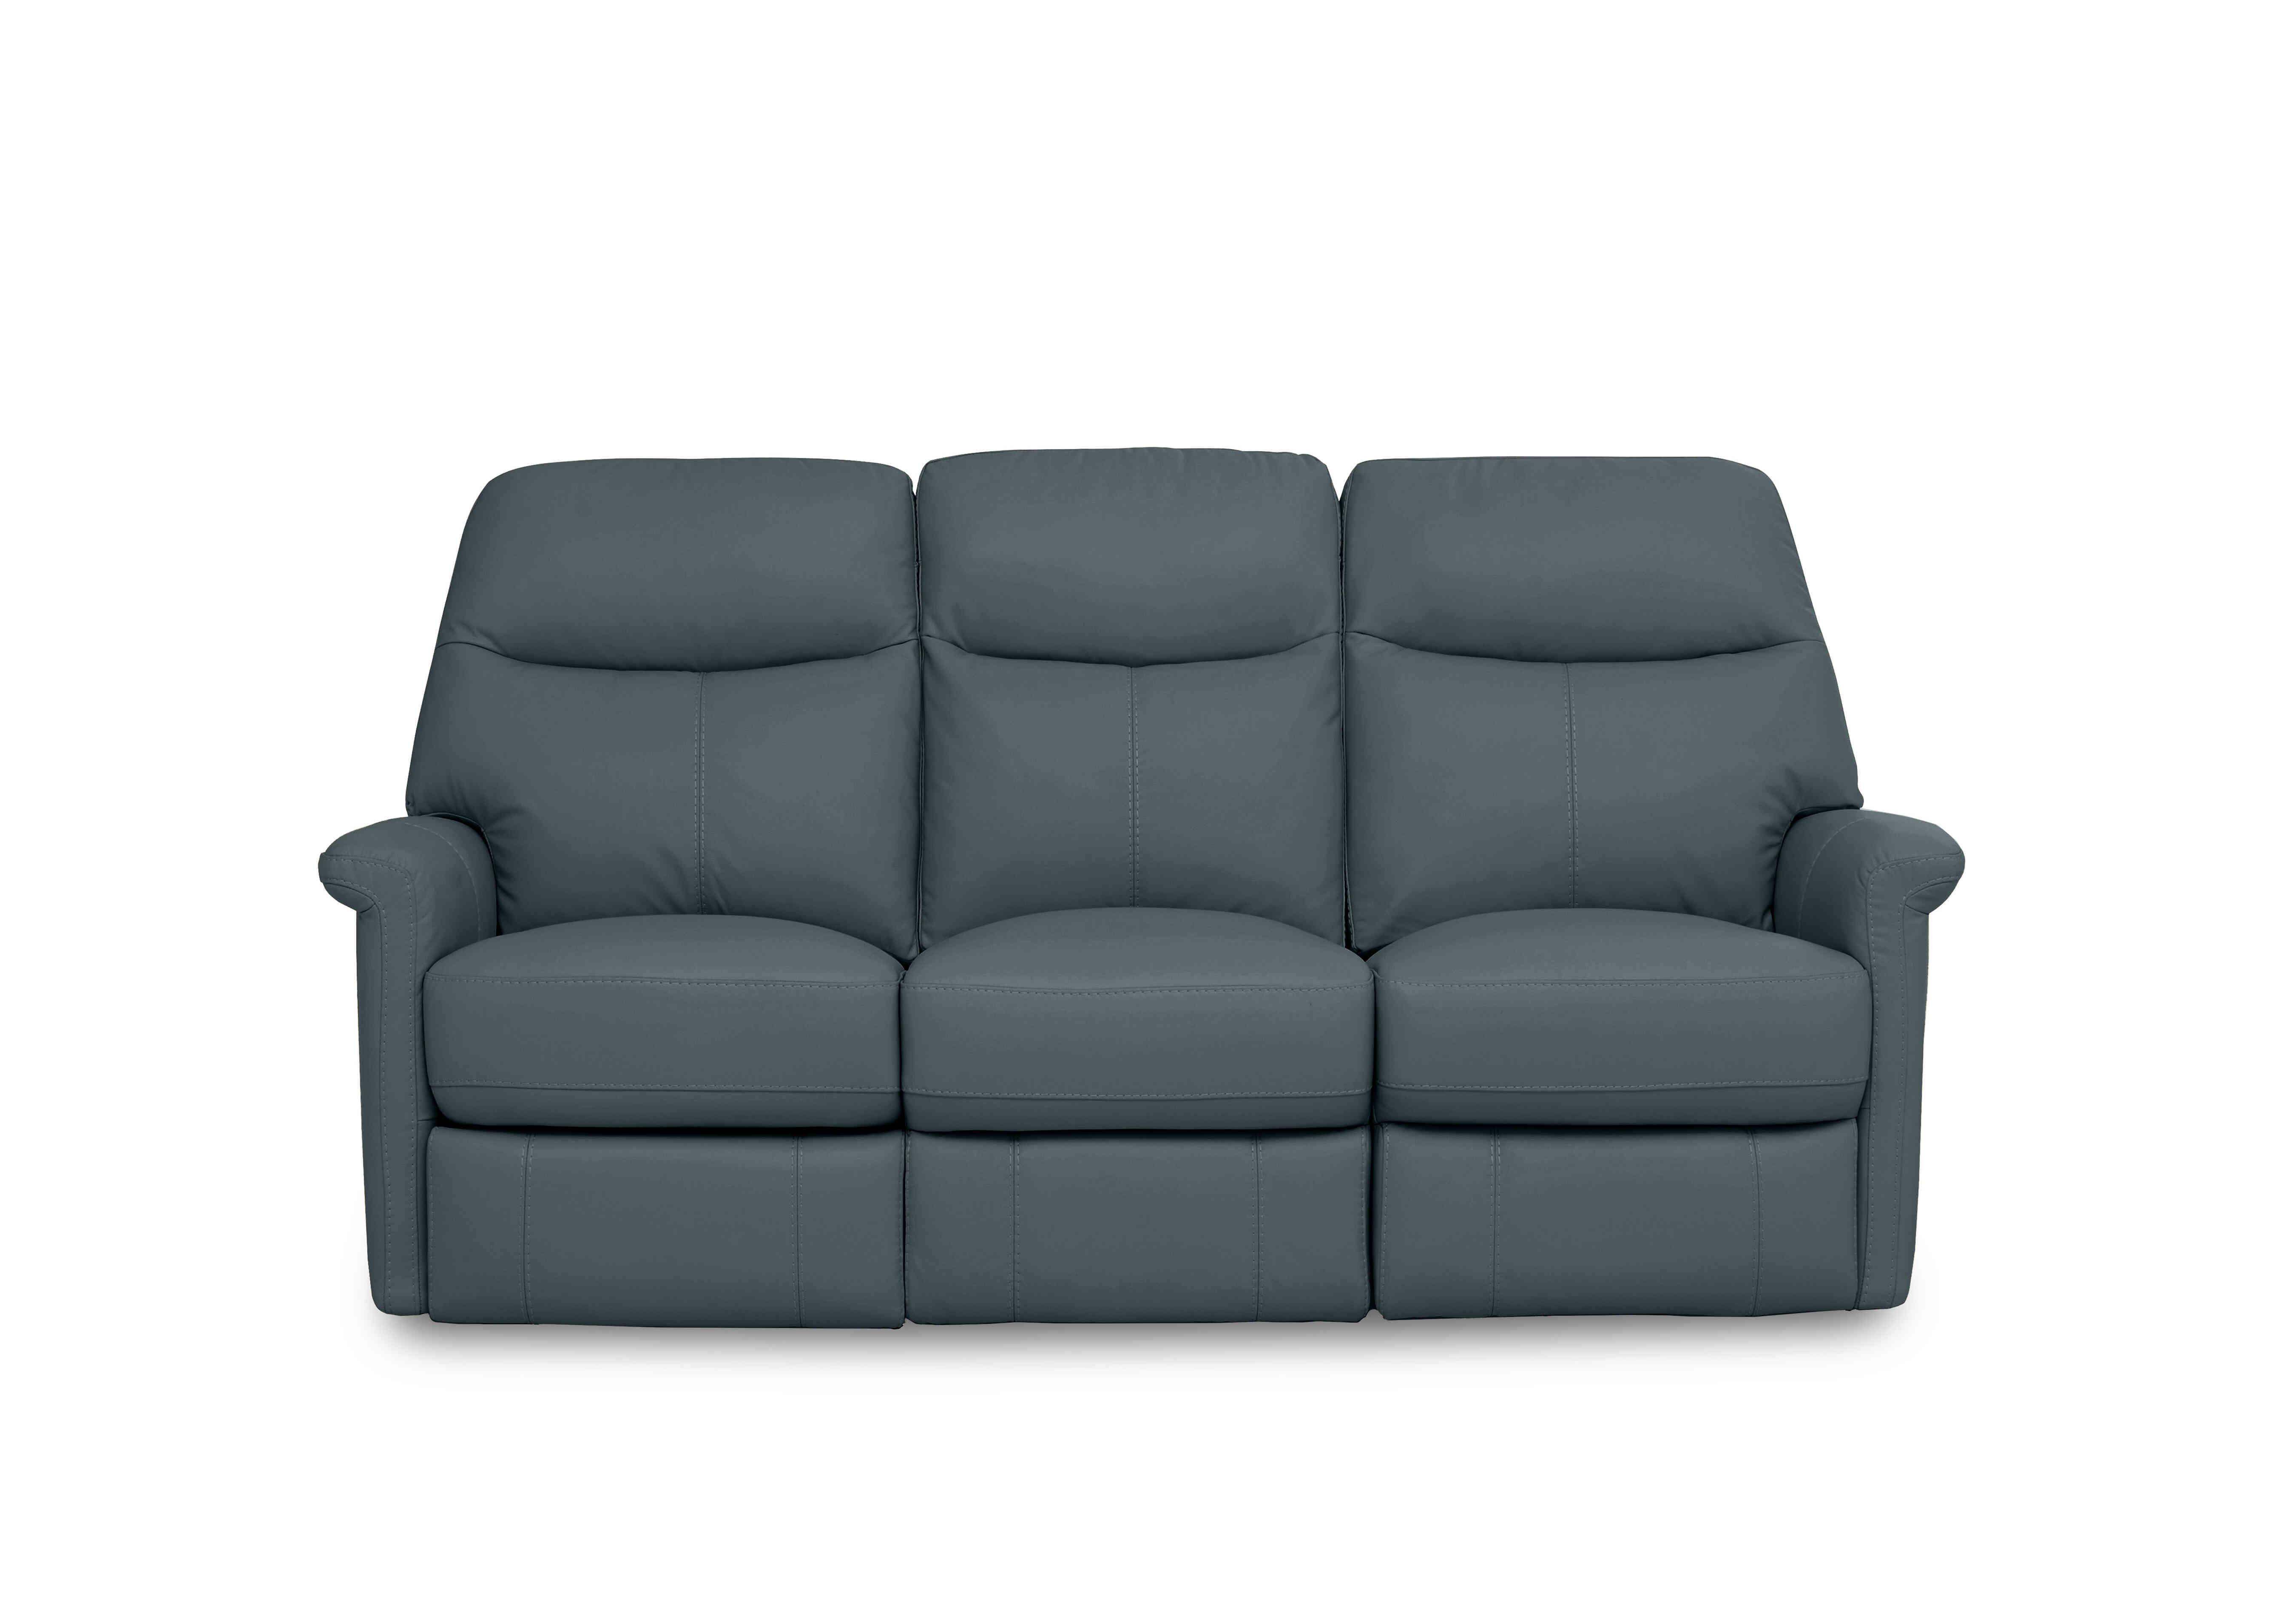 Compact Collection Lille 3 Seater Leather Sofa in Bv-301e Lake Green on Furniture Village